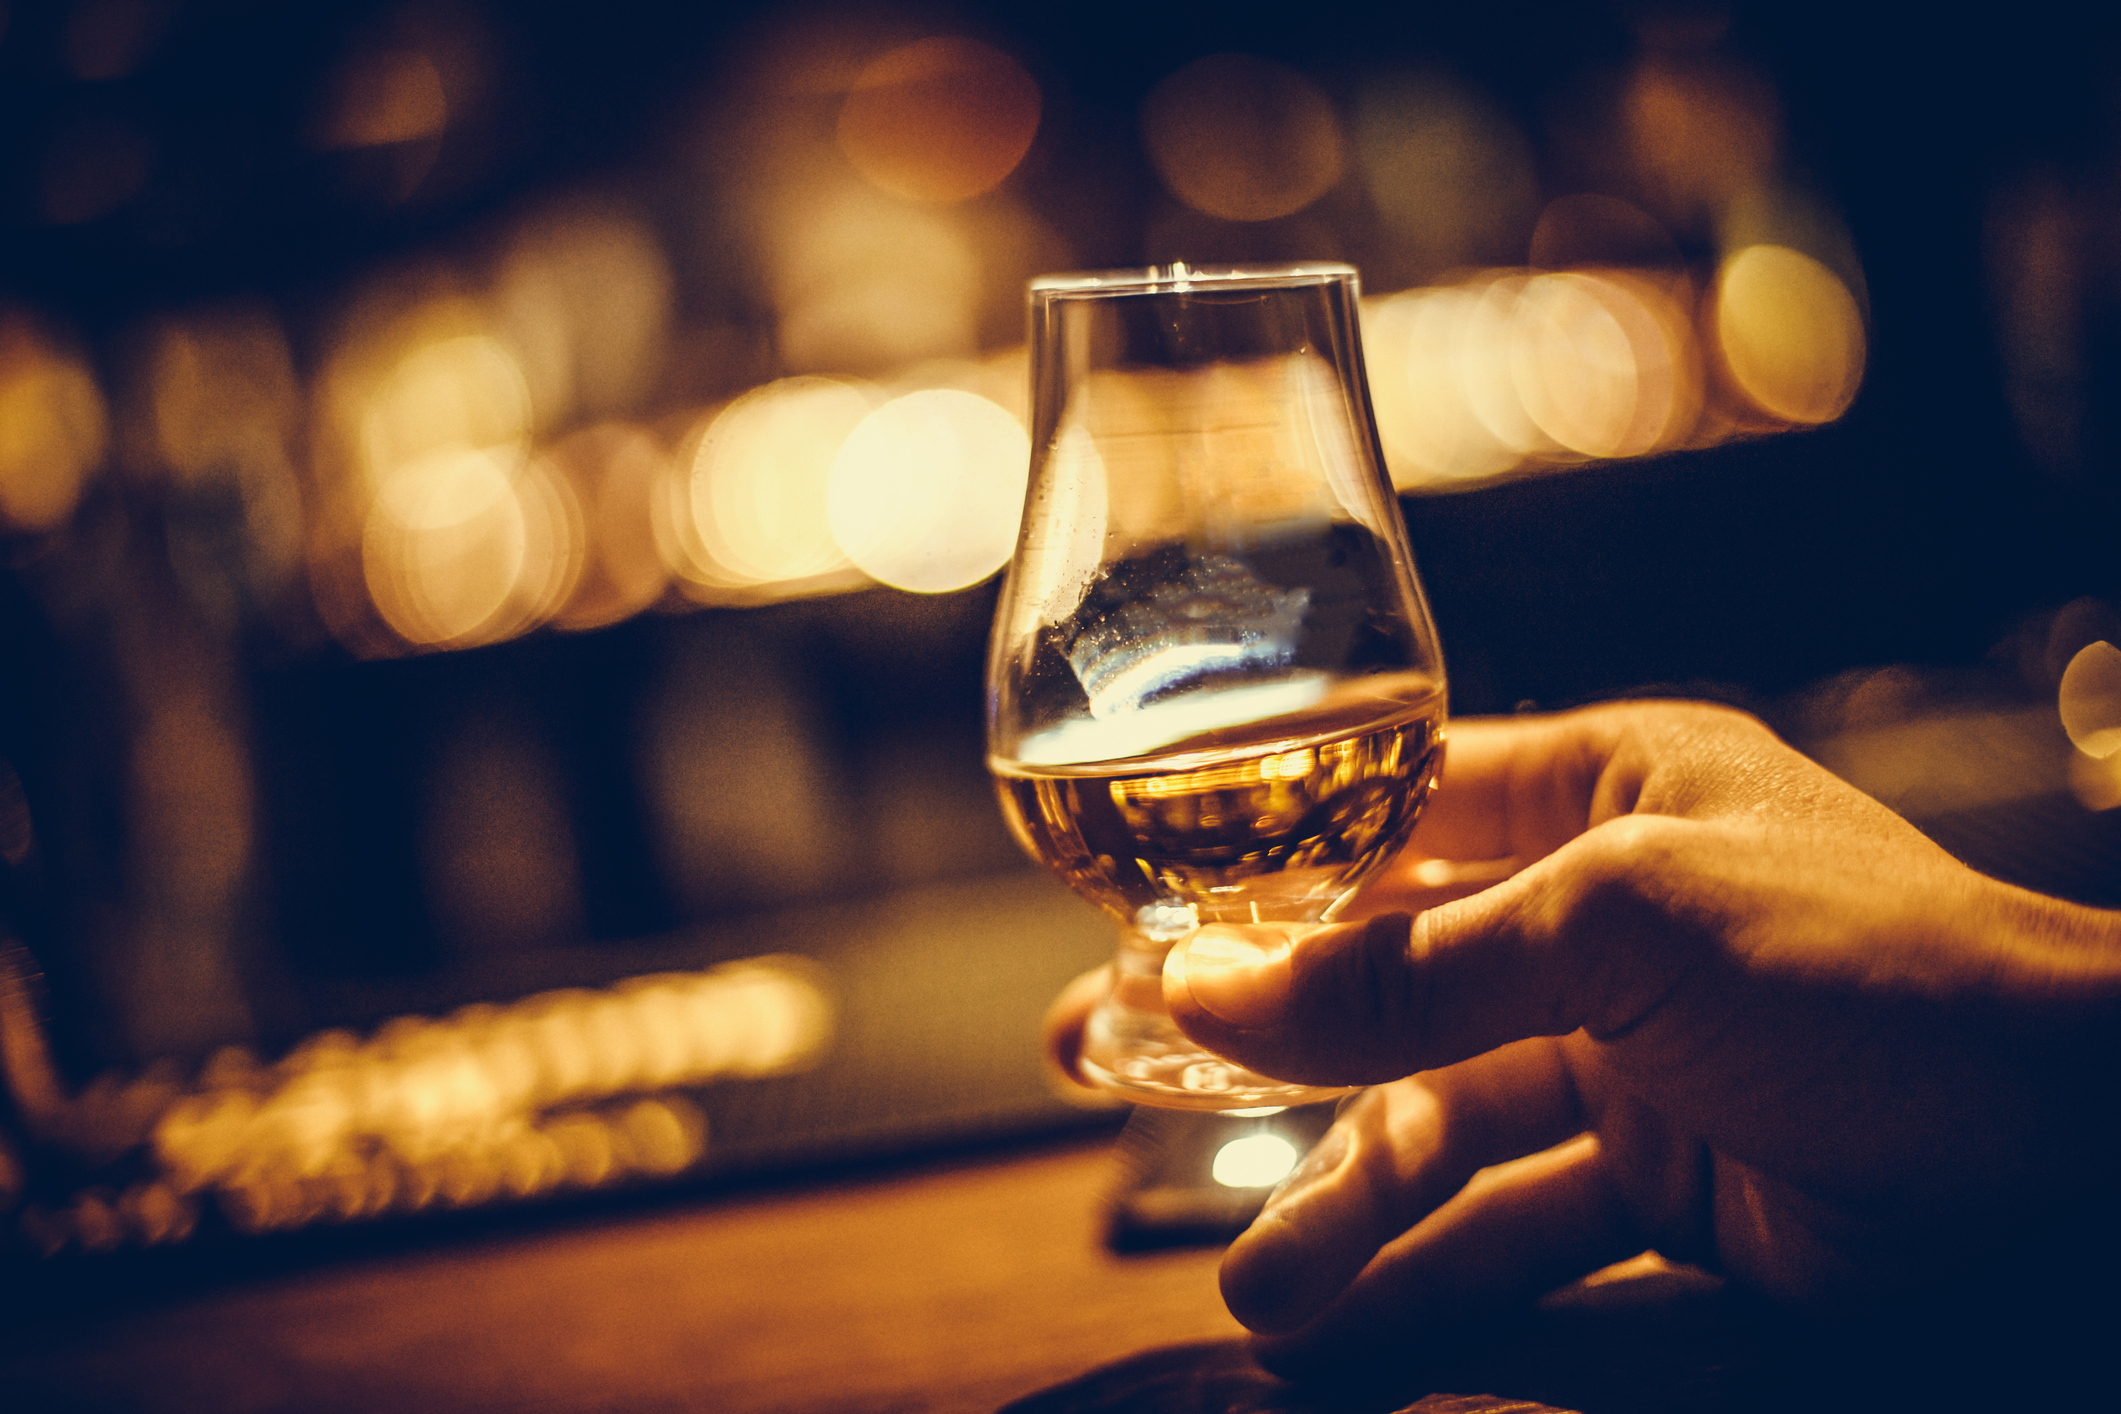 Single malt Scotch whisky is one of those in the firing line.